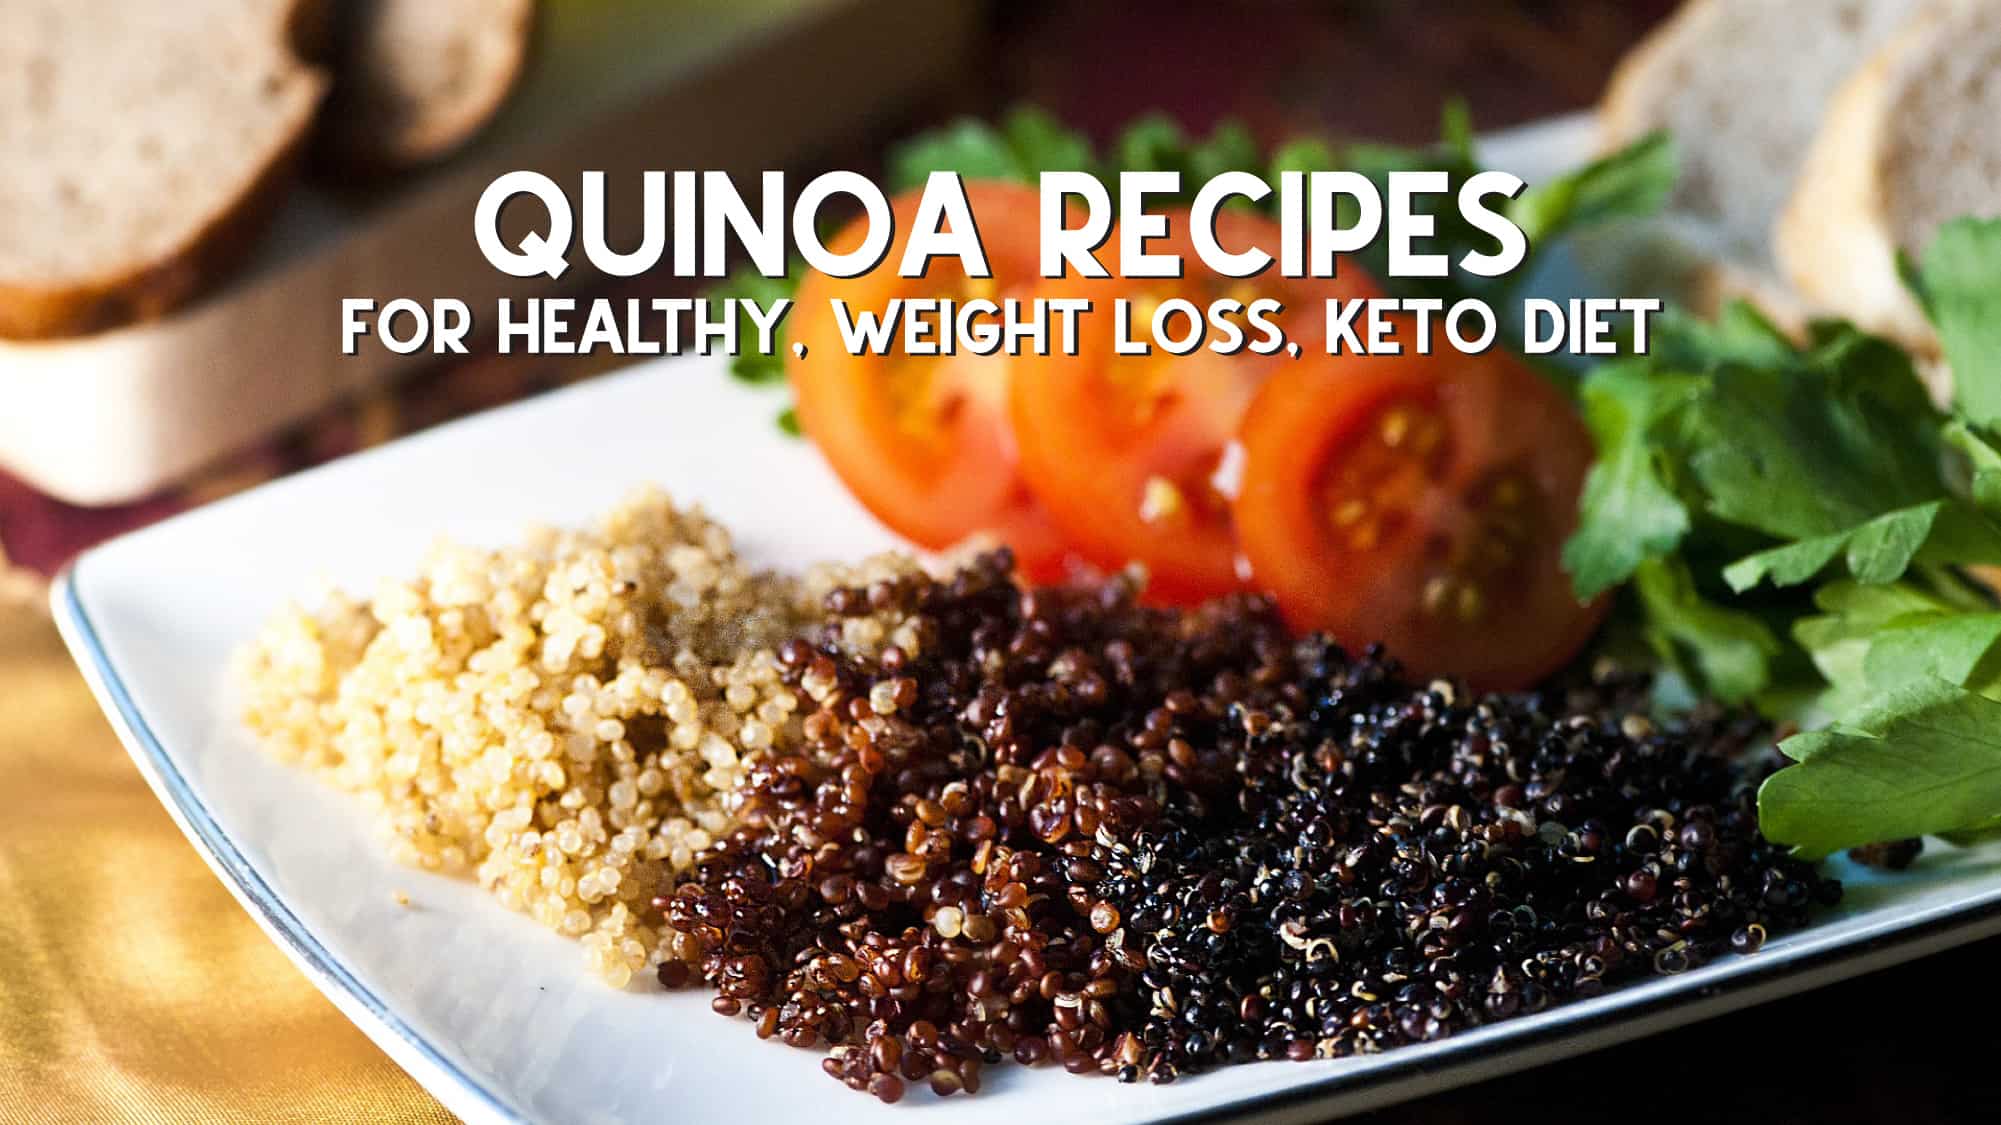 Quinoa recipes for healthy, weight loss, keto diet